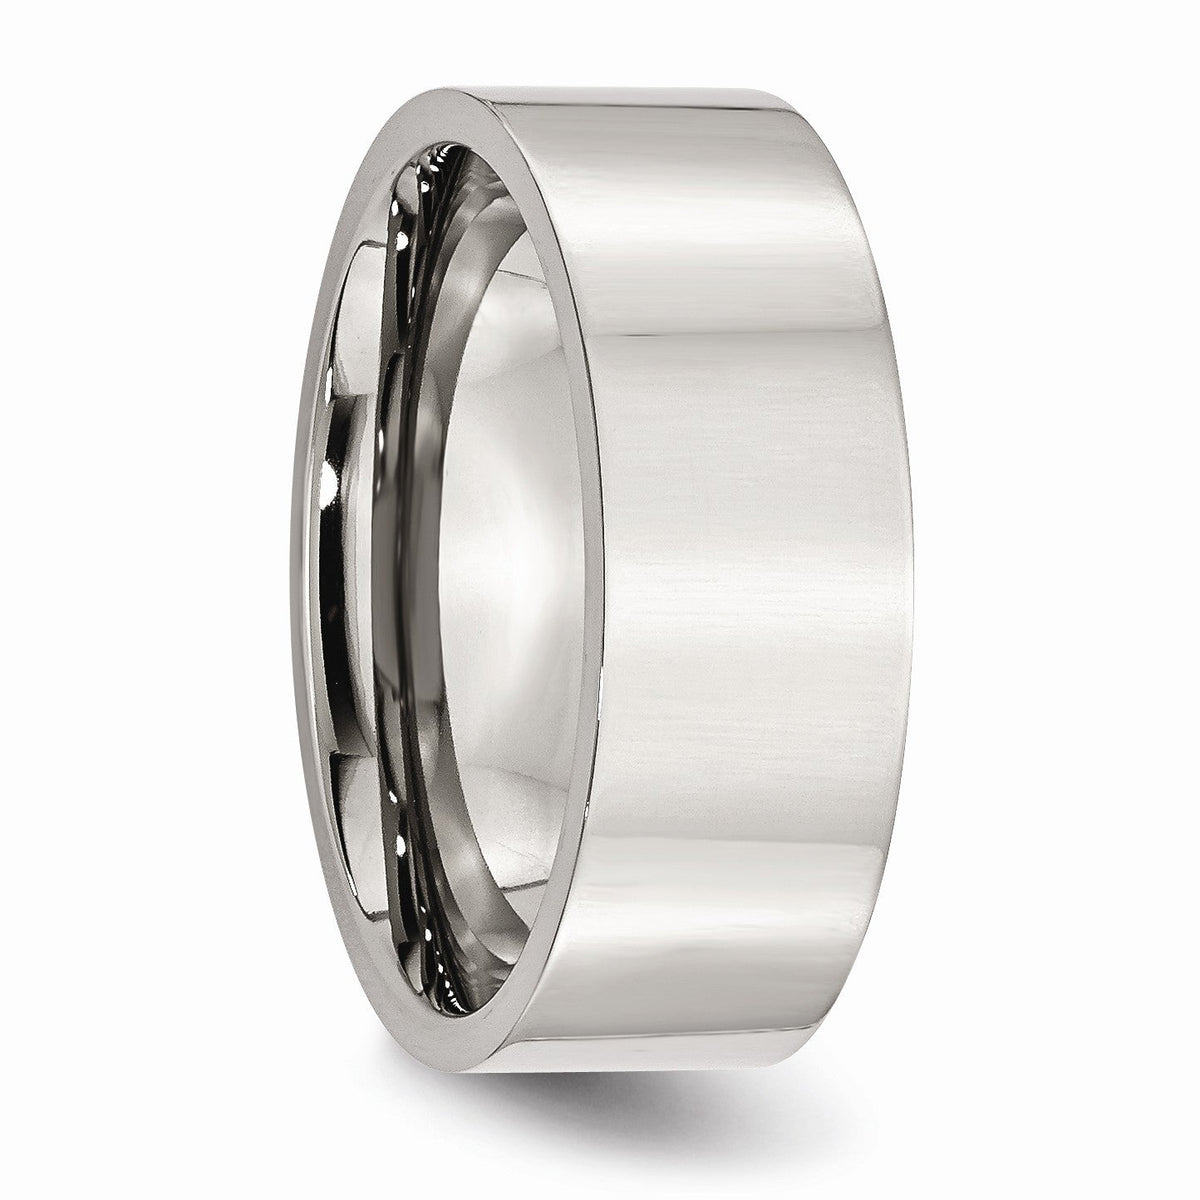 Alternate view of the 8mm Polished Stainless Steel Flat Comfort Fit Wedding Band by The Black Bow Jewelry Co.